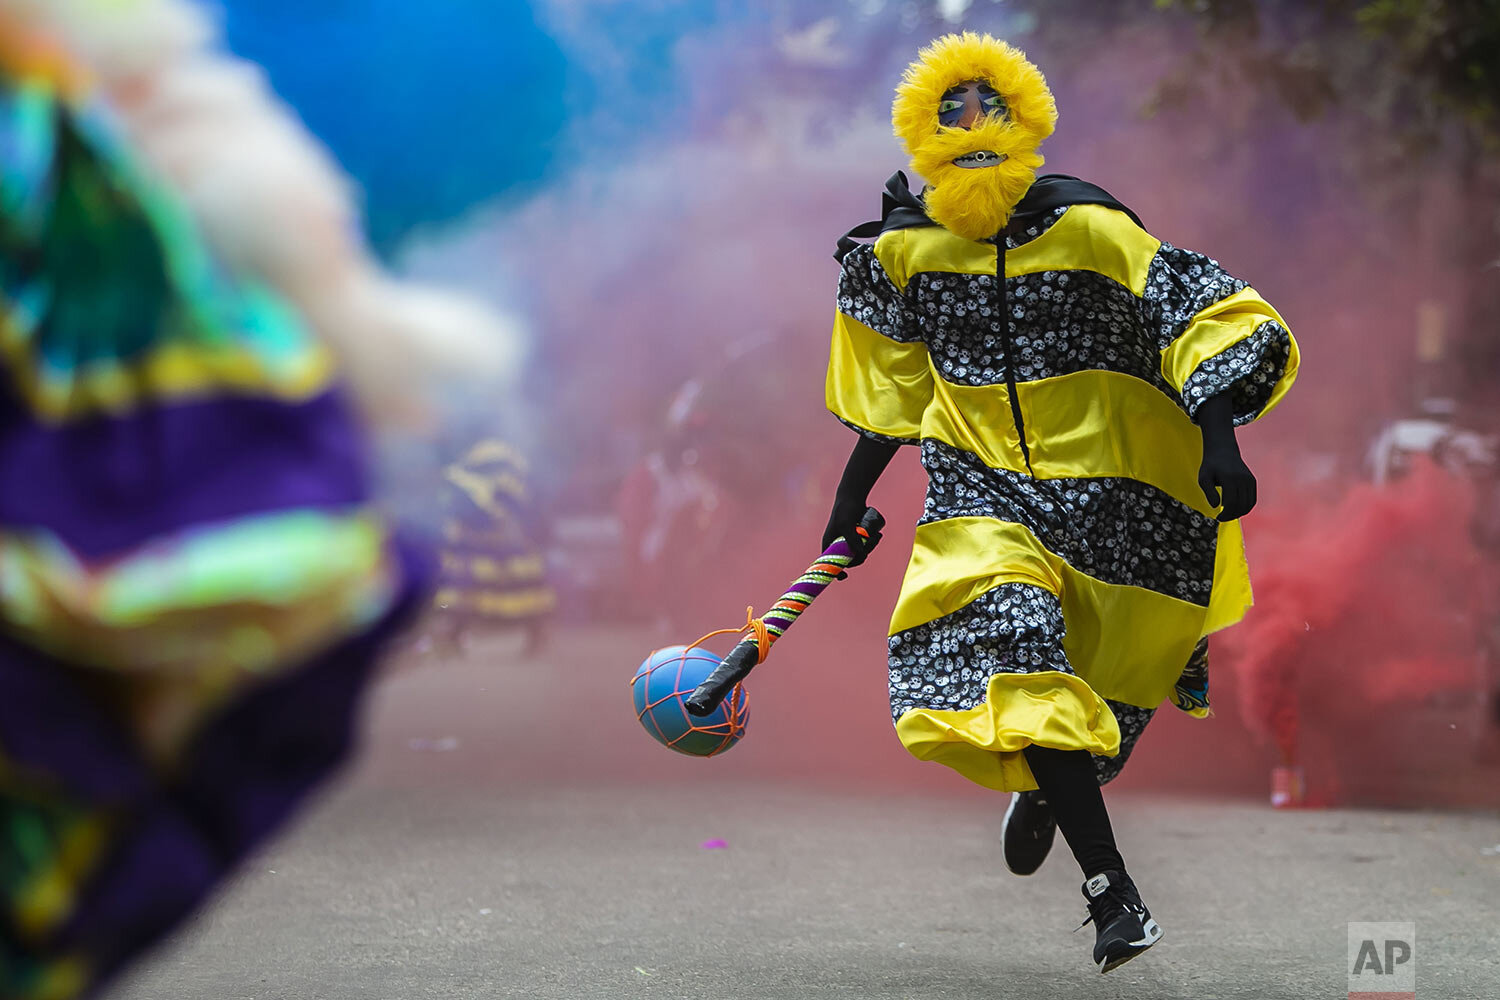  A man dressed in a costume known as "fantasias" runs during a brief appearance as part of a Carnival tradition in spite of COVID-19 pandemic restrictions in Rio de Janeiro, Brazil, Feb. 13, 2021. (AP Photo/Bruna Prado) 